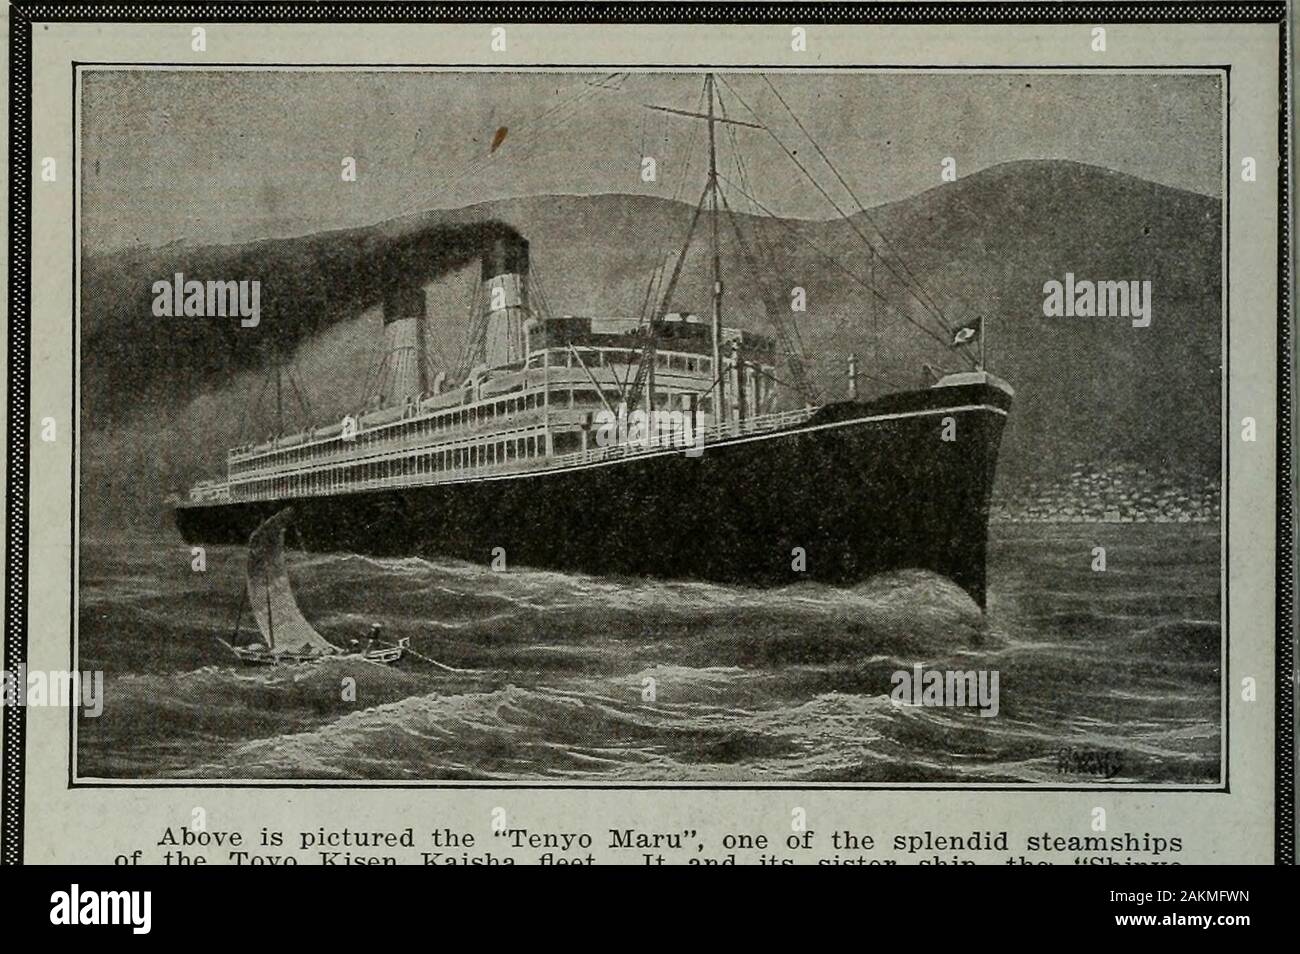 San Francisco blue book . Steamer Aquitania, 47,000 tons, one of the palatial Cunard Liners,Operating in the Express Service to and from Europe , UNEXCELLED STEAMSHIP SERVICE FASTEST TIME TO AND FROM THE EUROPEAN COUNTRIES OFFICE IN CUNARD BUILDING SOUTHWEST CORNER MARKET AND FIRST STREETS SAN FRANCISCO Telephone Sutter 6720 20 LEADING STEAMSHIP COMPANIES. Above is pictured the Tenyo Maru, one of the splendid steamshipsof the Toyo Kisen Kaisha fleet. It and its sister ship, the ShinyoMaru are the largest, fastest, most comfortable and luxurious of anypassenger ships, plying between San Francis Stock Photo